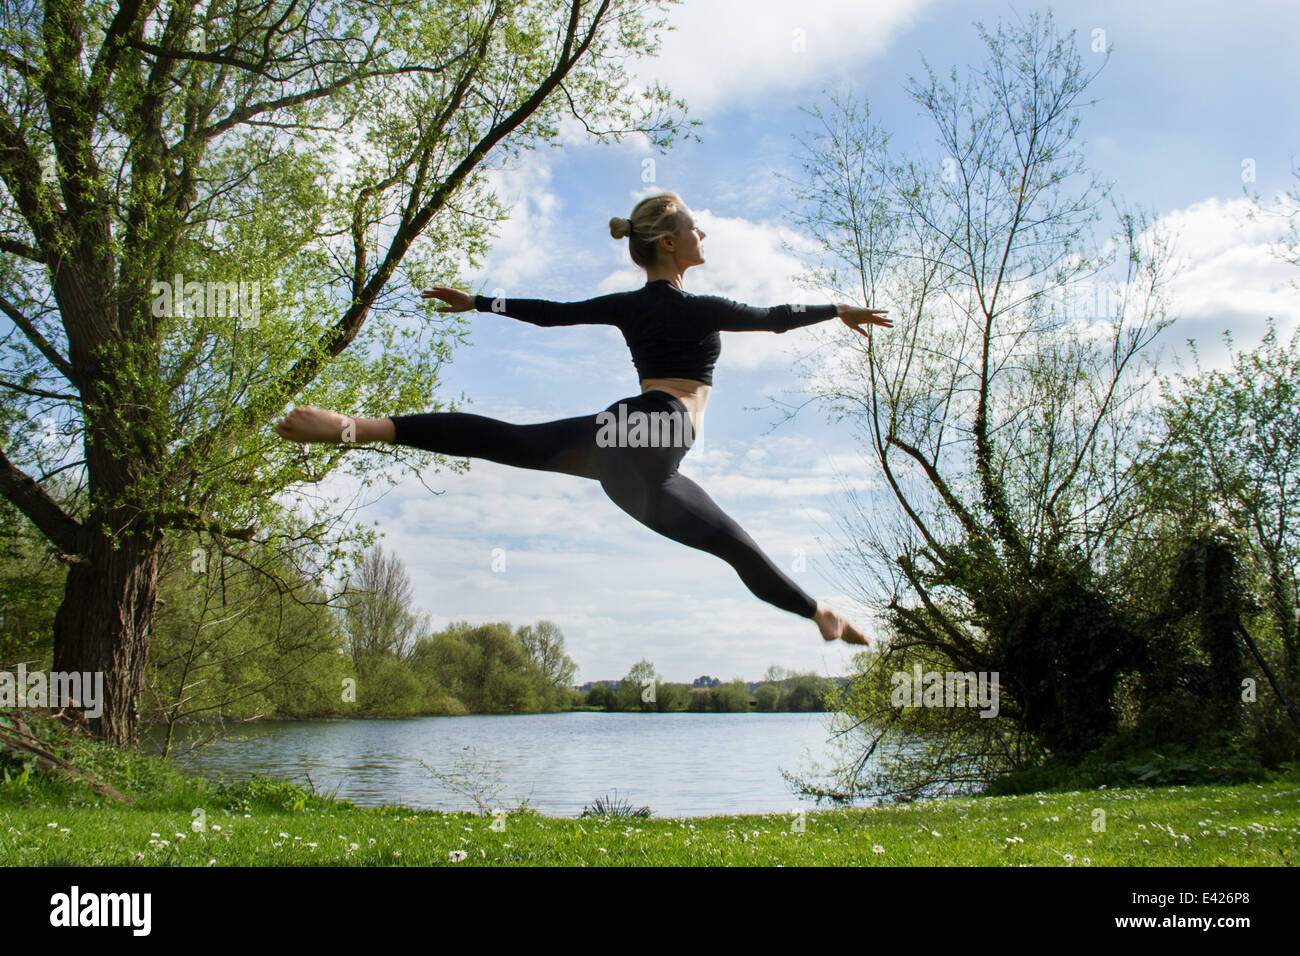 Young female dancer jumping mid air near lake Stock Photo